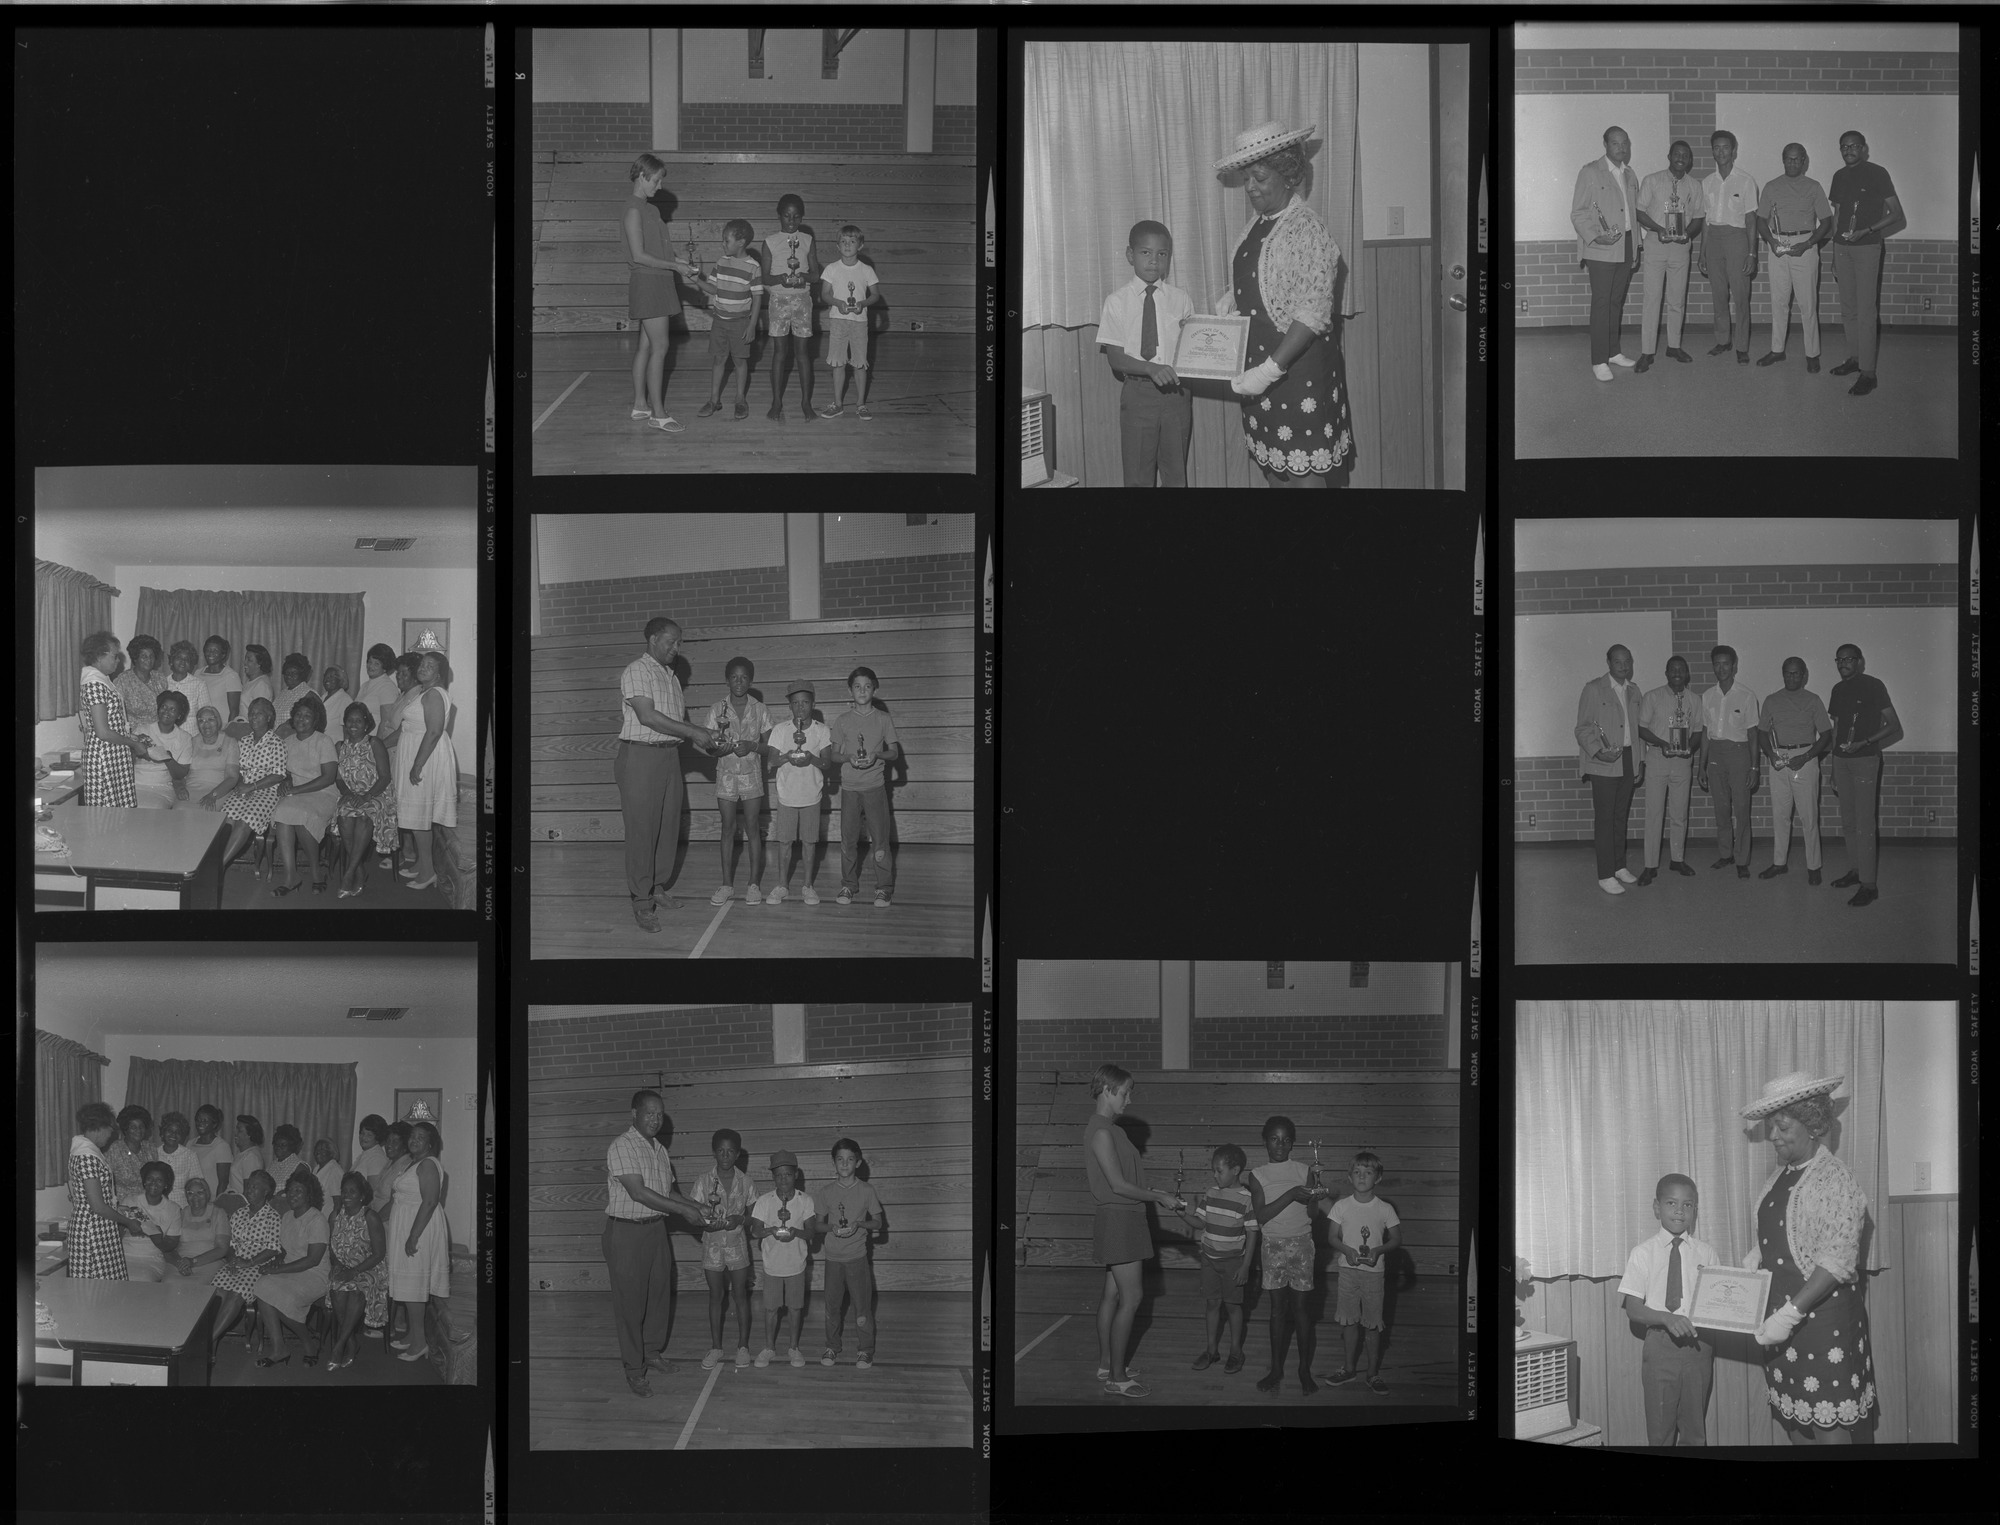 Set of negatives by Clinton Wright including Second Baptist Prayer Band, Elder H. Dorsey, Tony Cox receives award from Mabel Hoggard, marble tournament at Doolittle, and Kappa's golf tournament, 1970, page 1